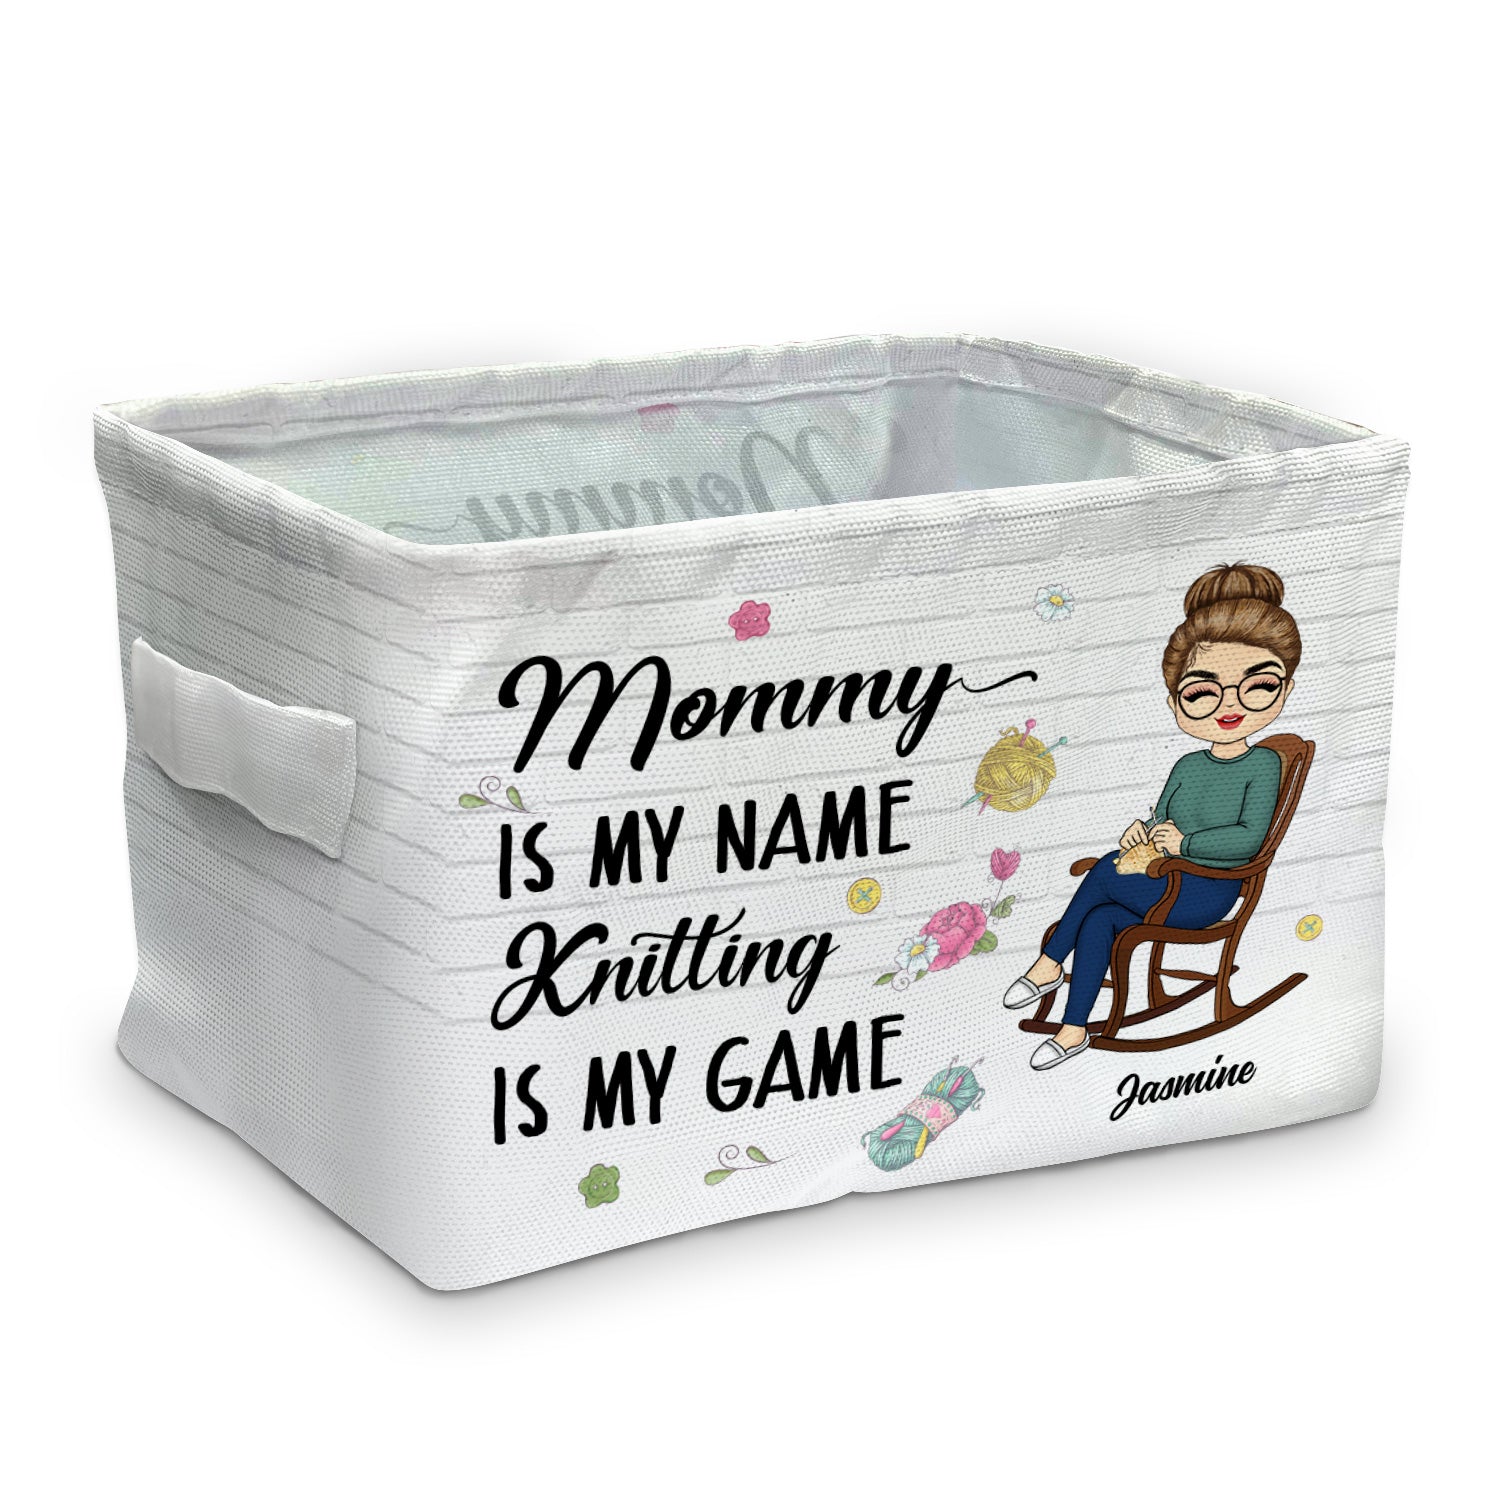 Knitting Is My Game - Gift For Mother - Personalized Storage Box